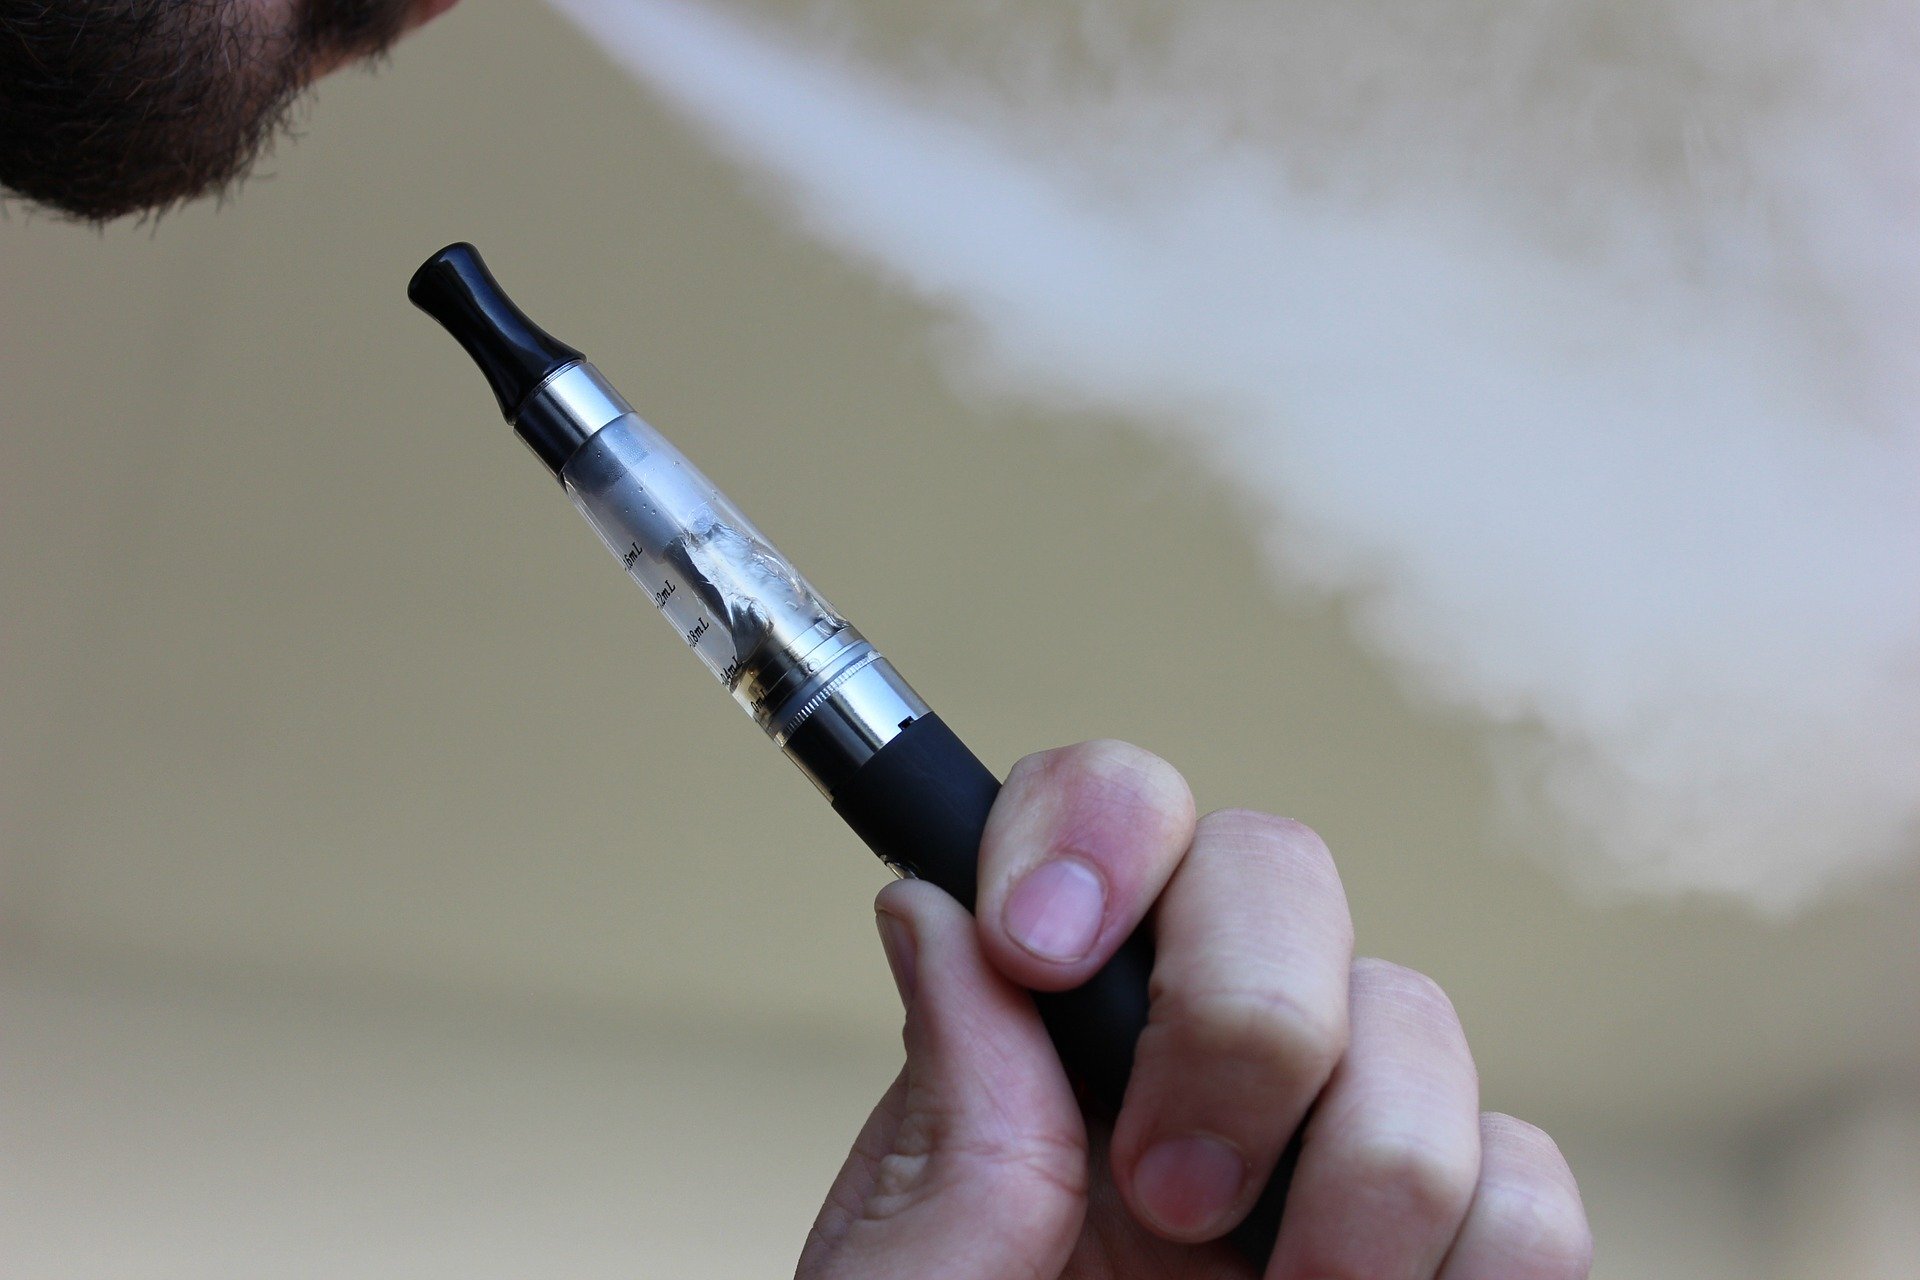 #New studies suggest vaping could cloud your thoughts